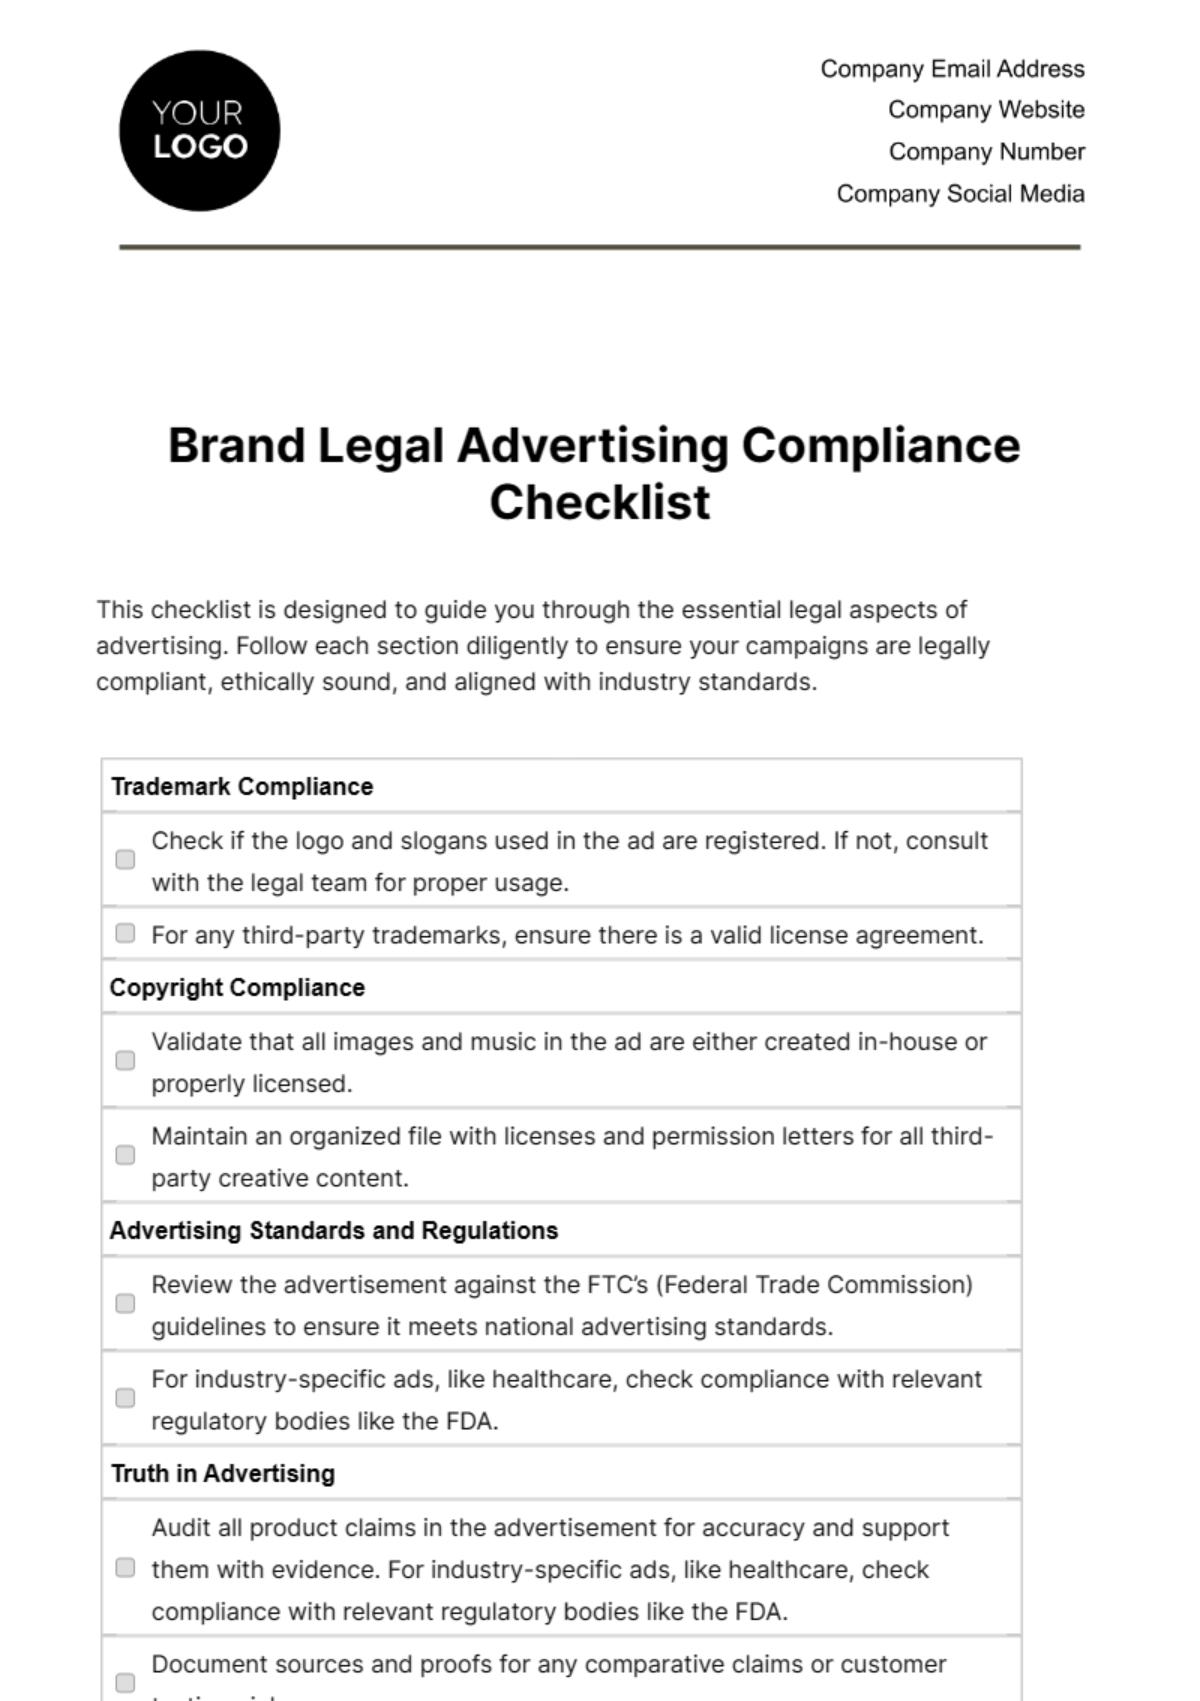 Free Brand Legal Advertising Compliance Checklist Template